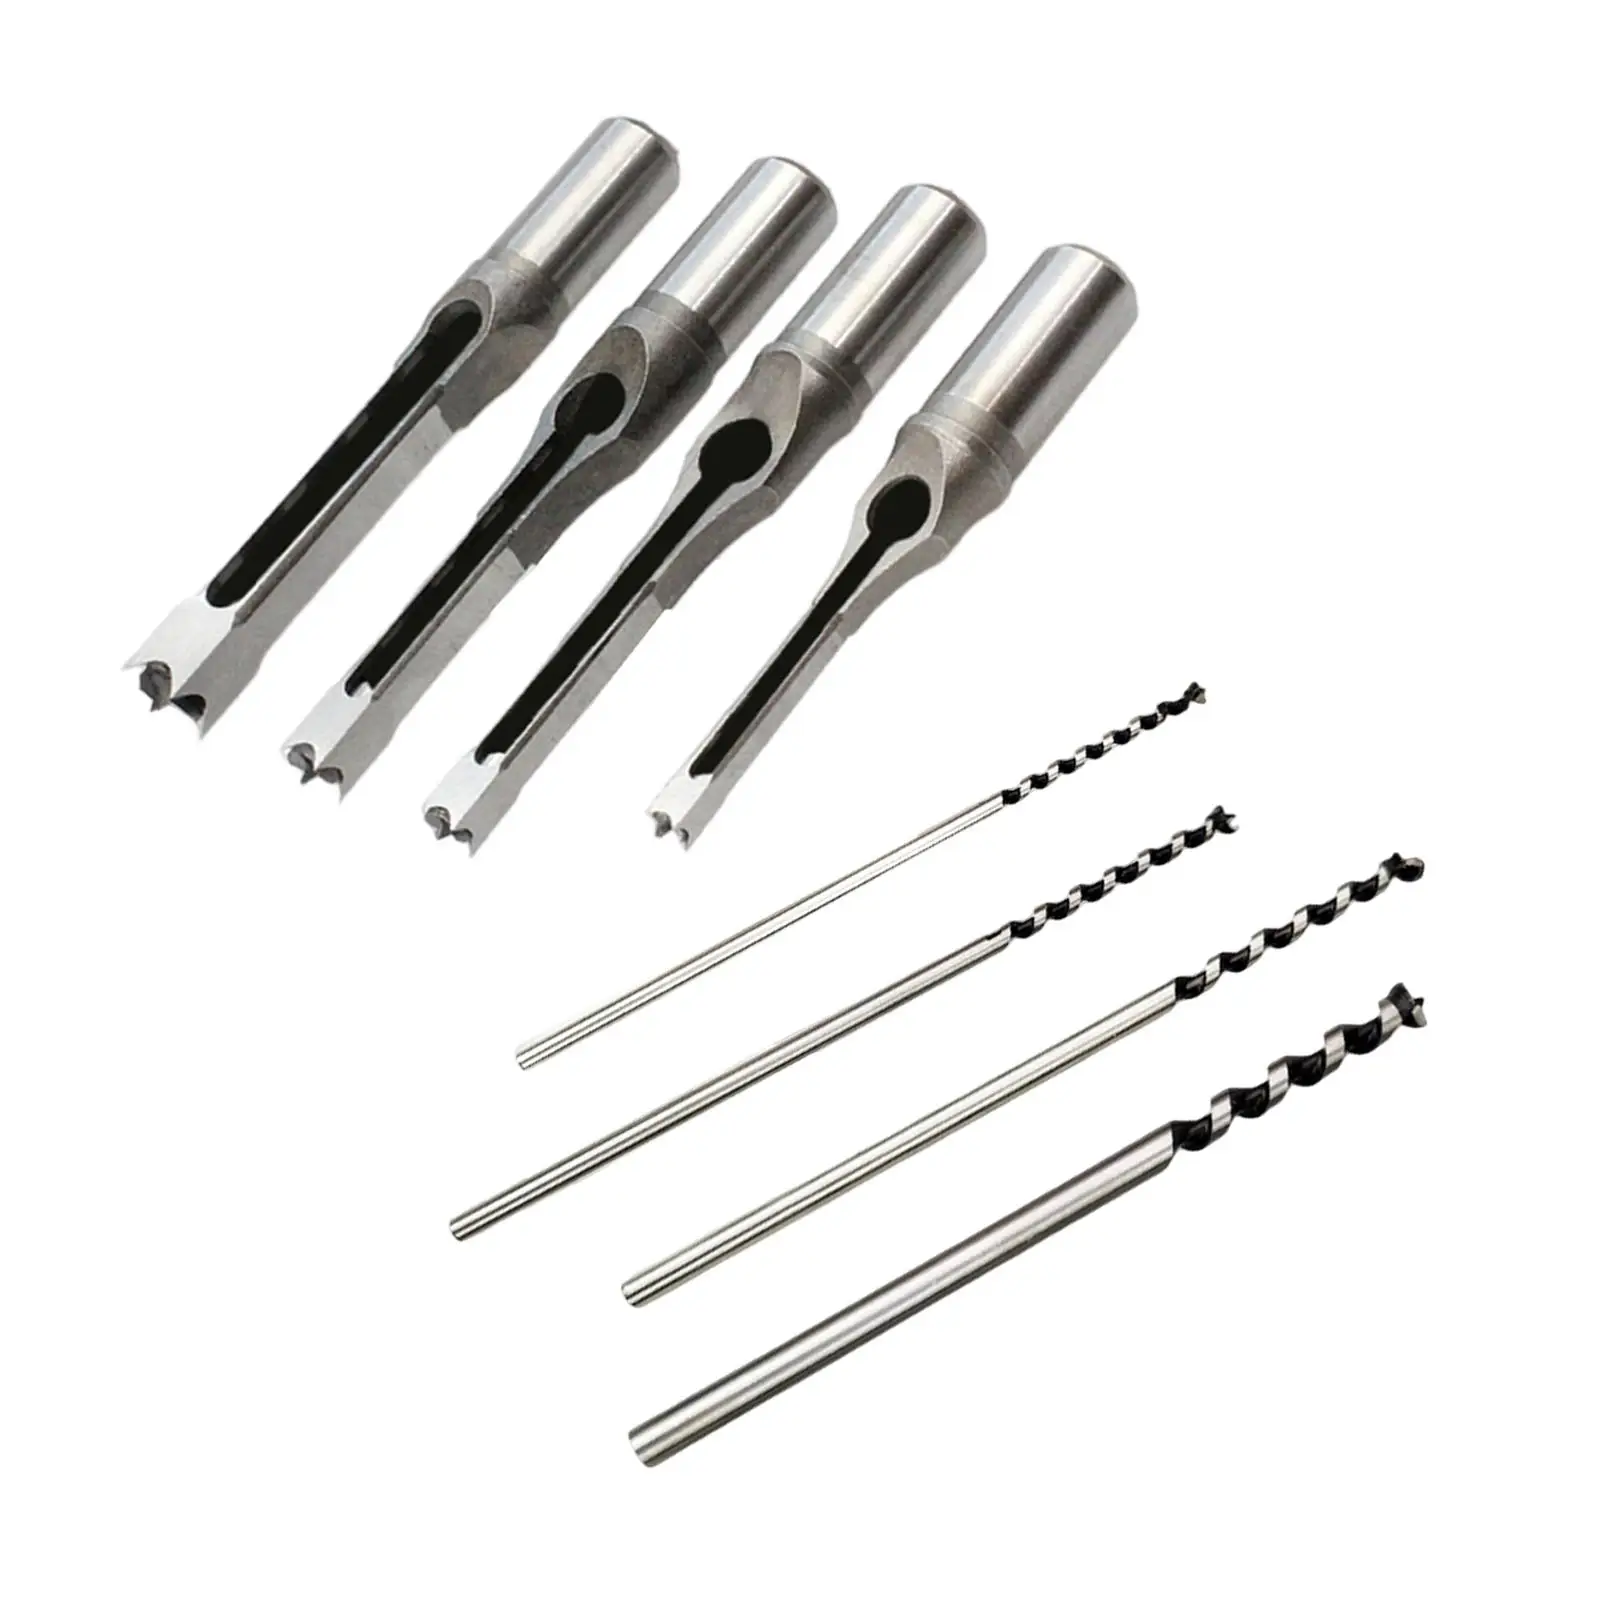 4x HSS Durable Hole Drill Bit for Carpenter Drill Press Attachments Hole Opening Drilling Tools Mortising Machines